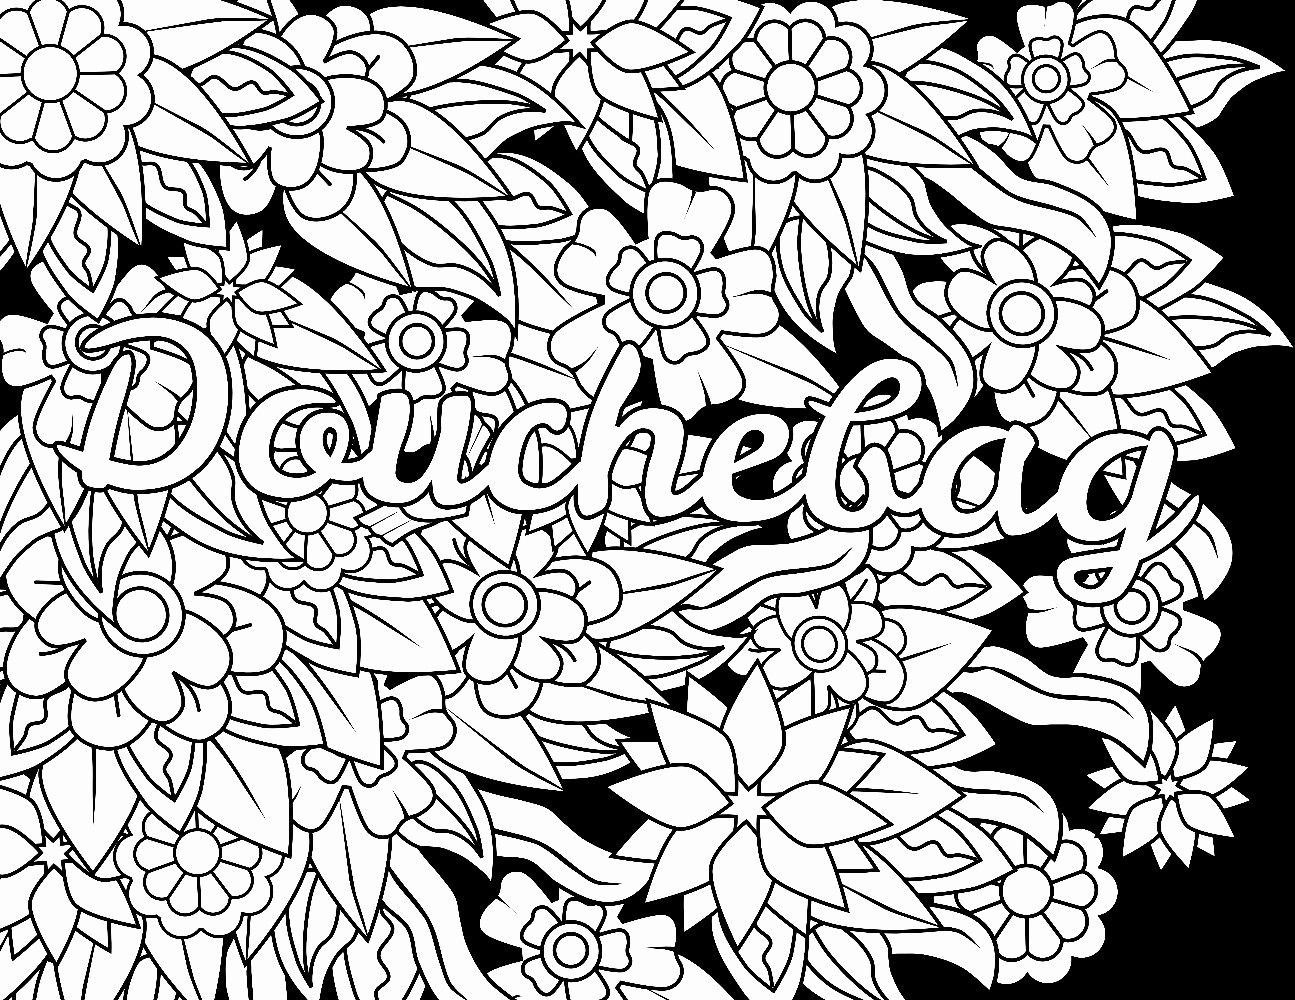 28 Cute Flower Vase Photos 2023 free download flower vase photos of printable coloring pages flowers cool vases flower vase coloring with regard to printable coloring pages flowers cool vases flower vase coloring page pages flowers in a